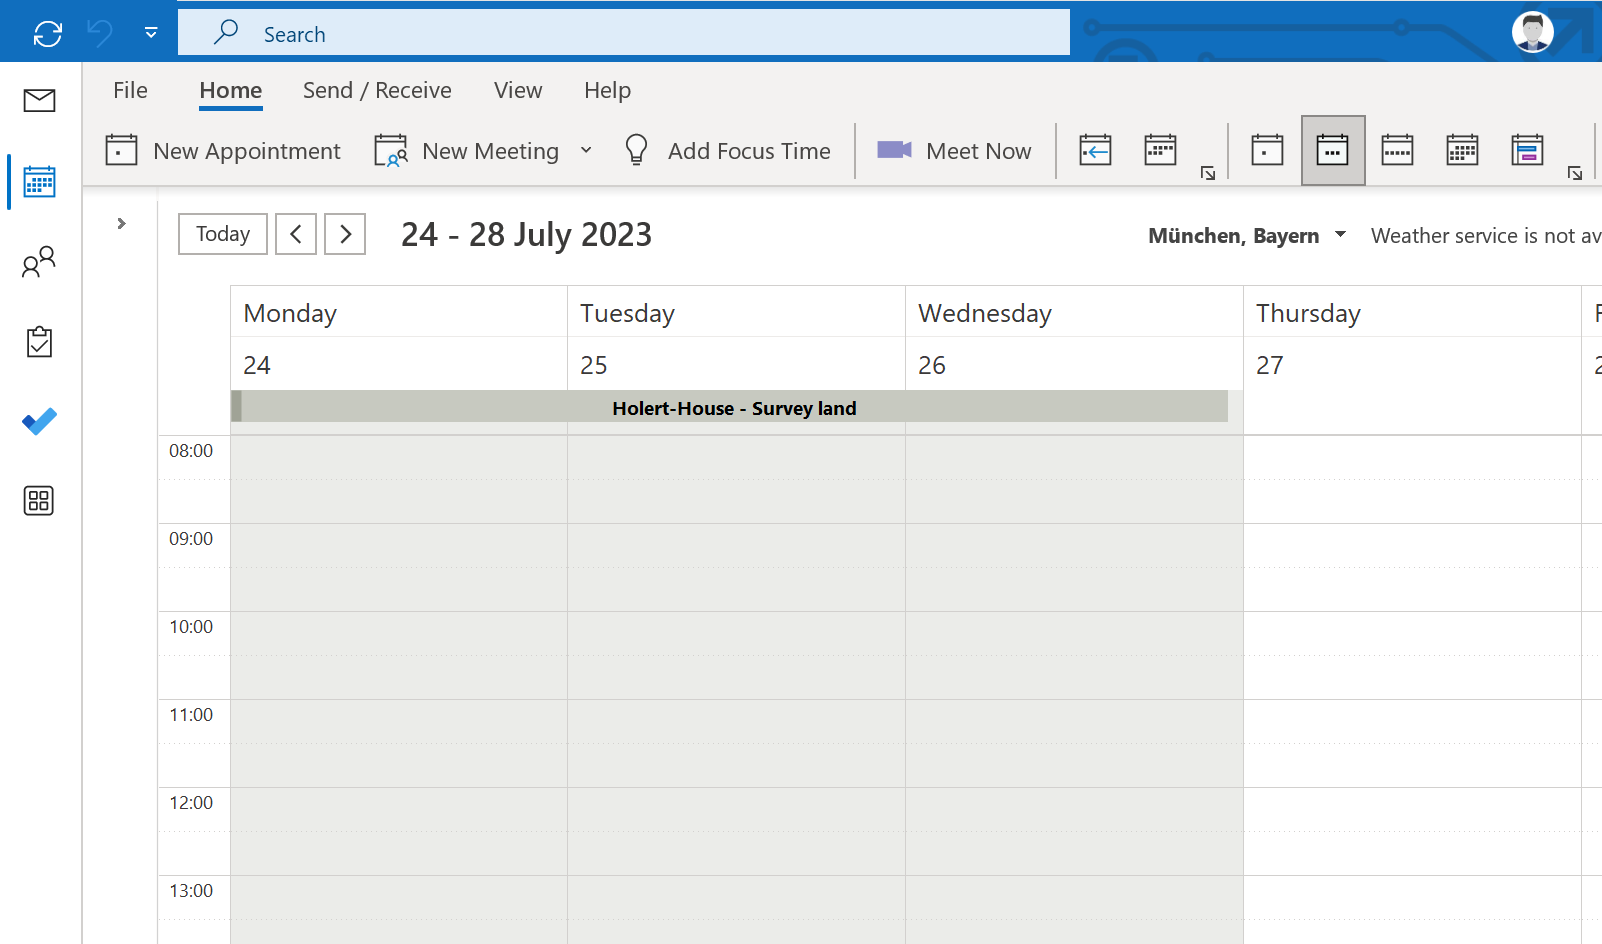 ms-project-outlook-calendar-event-top-down-3